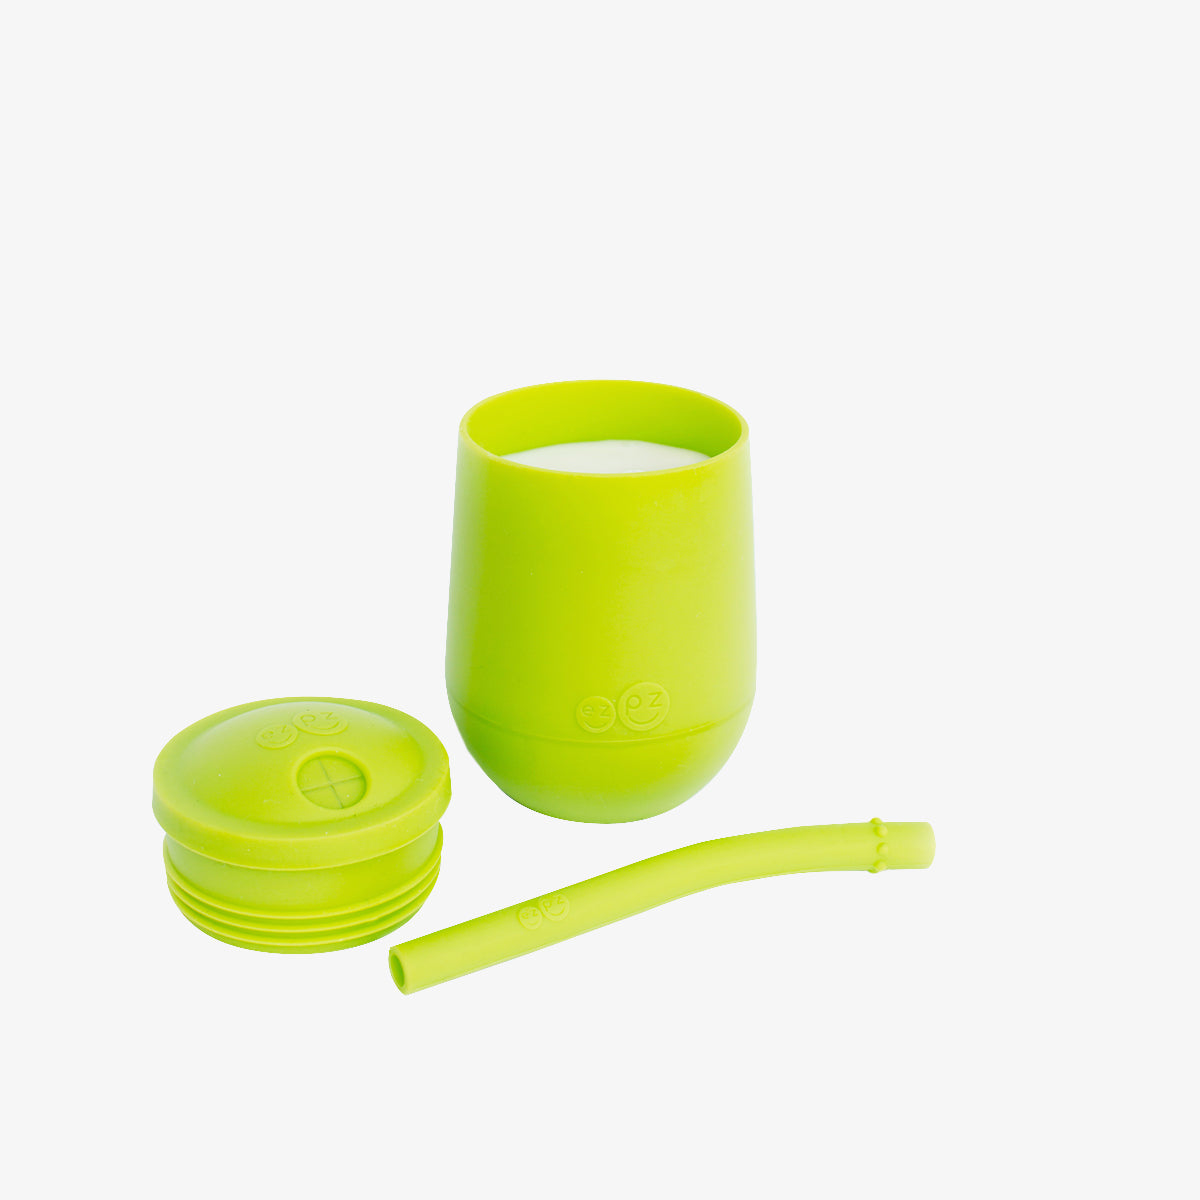 The Mini Cup + Straw in Lime by ezpz / Silicone Drinking Cup and Straw Training System for Toddlers